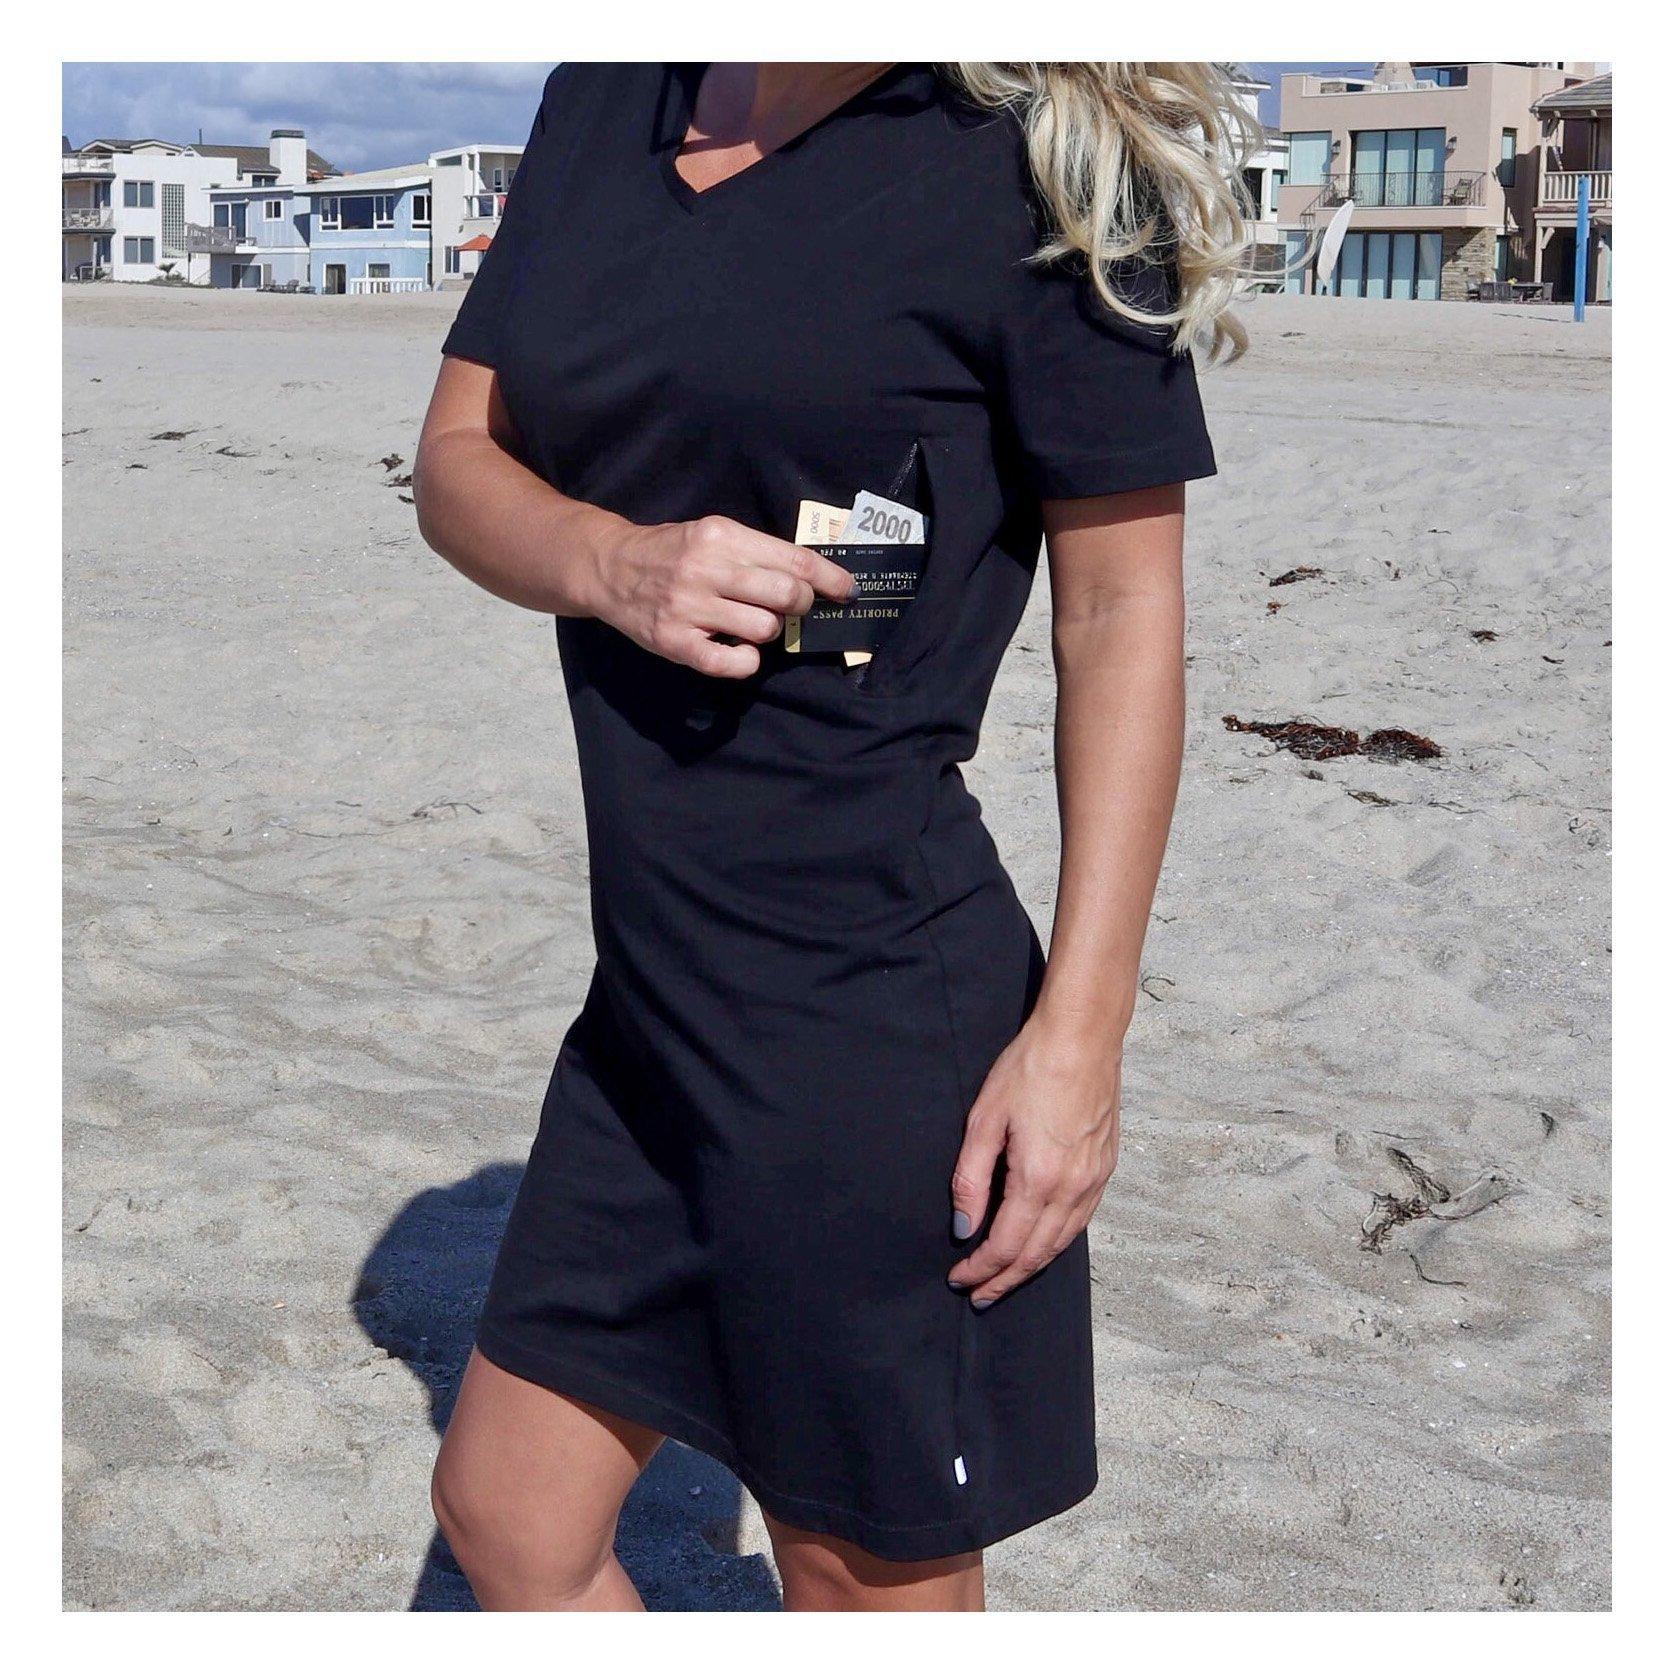 Women's Pickpocket Proof T-shirt Dress with Secret Zipper Pockets – The  Clever Travel Company